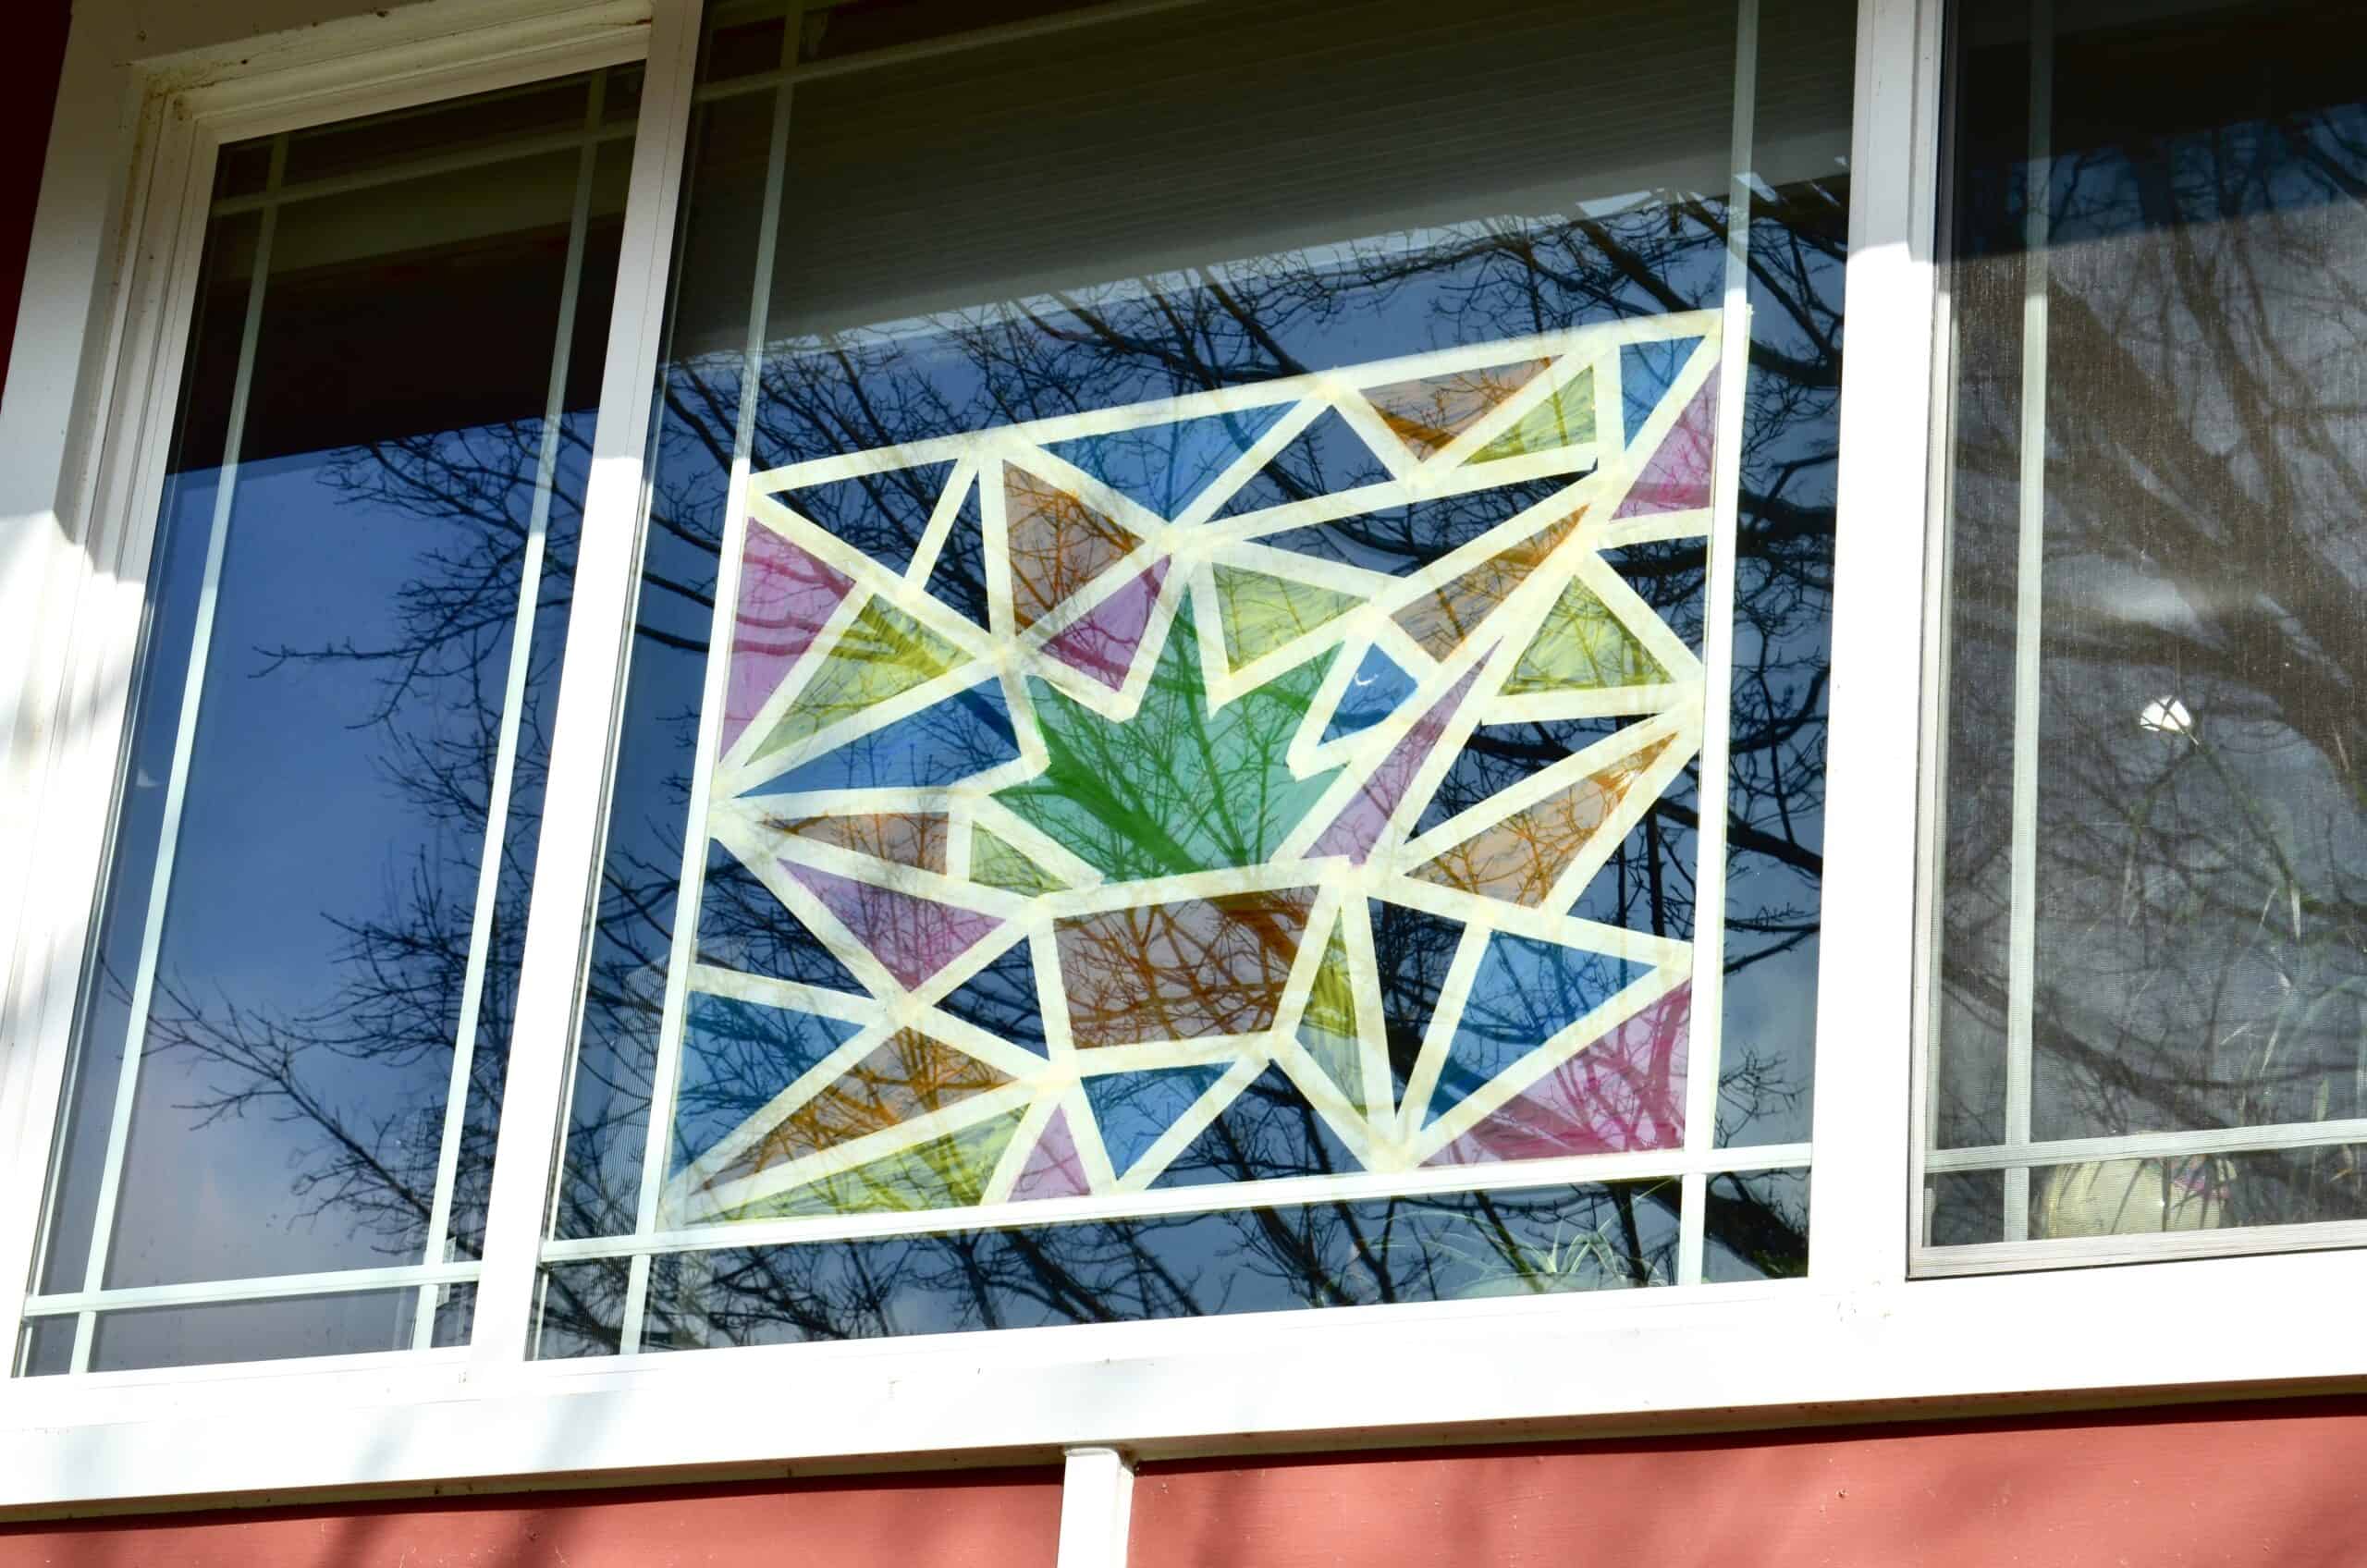 How to Paint Stained Glass Windows at Home Art Activity for Kids